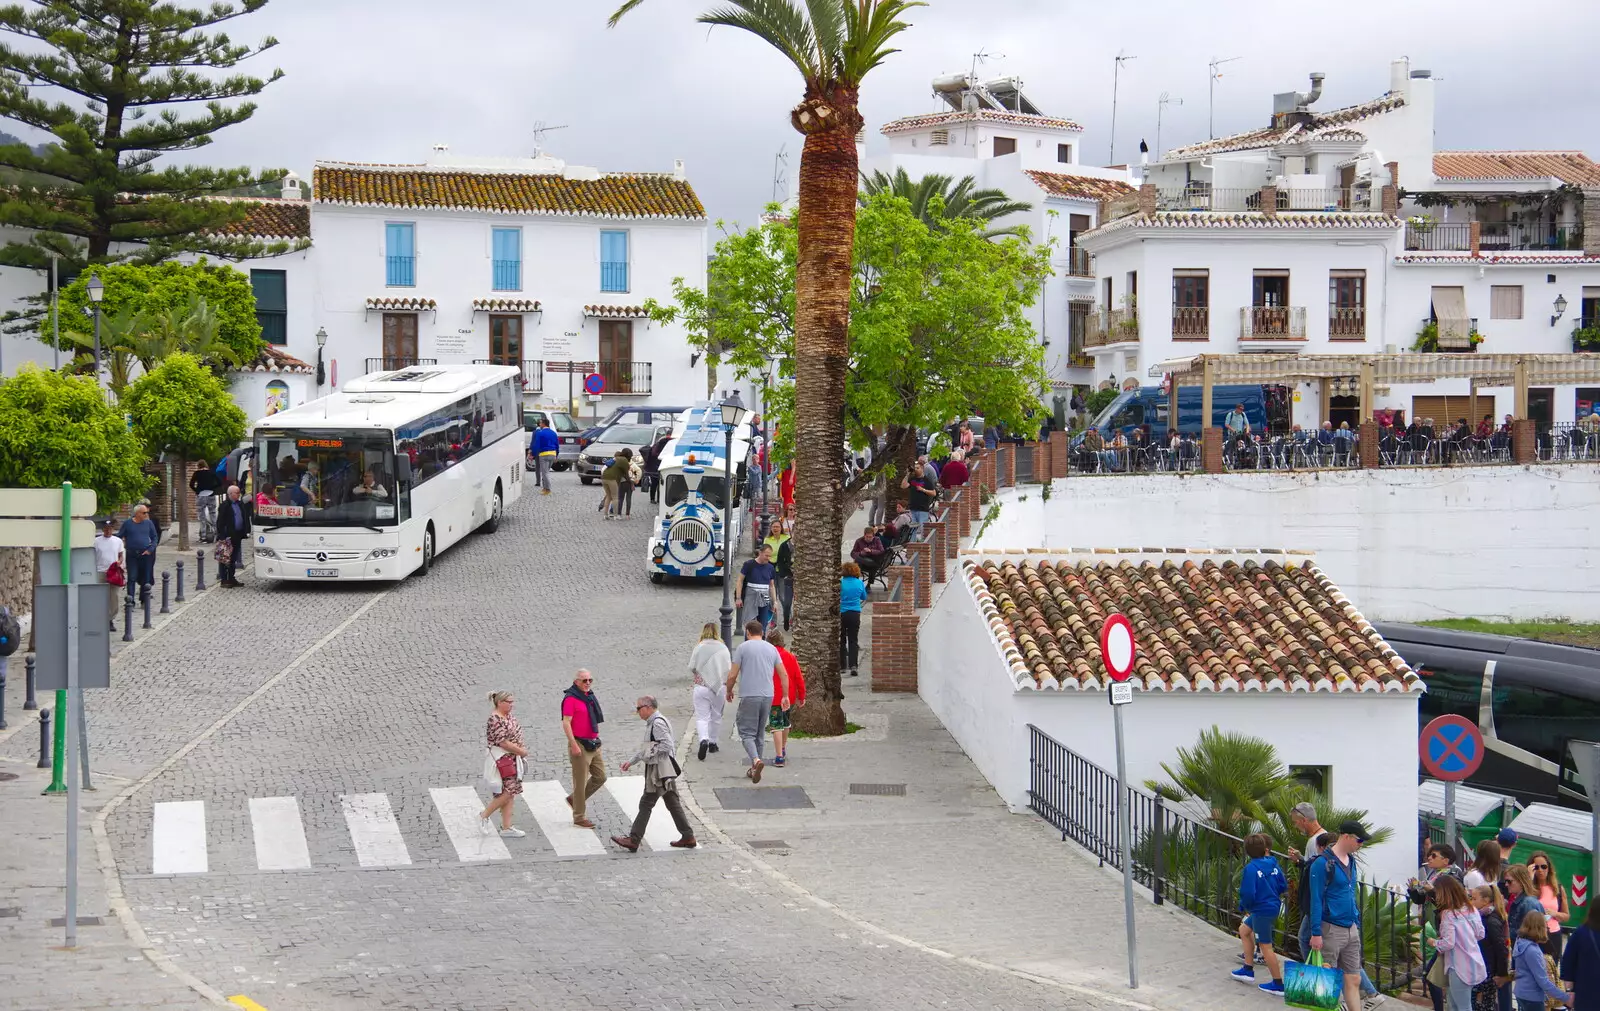 Tourist coaches and the mini train, from The Caves of Nerja, and Frigiliana, Andalusia, Spain - 18th April 2019